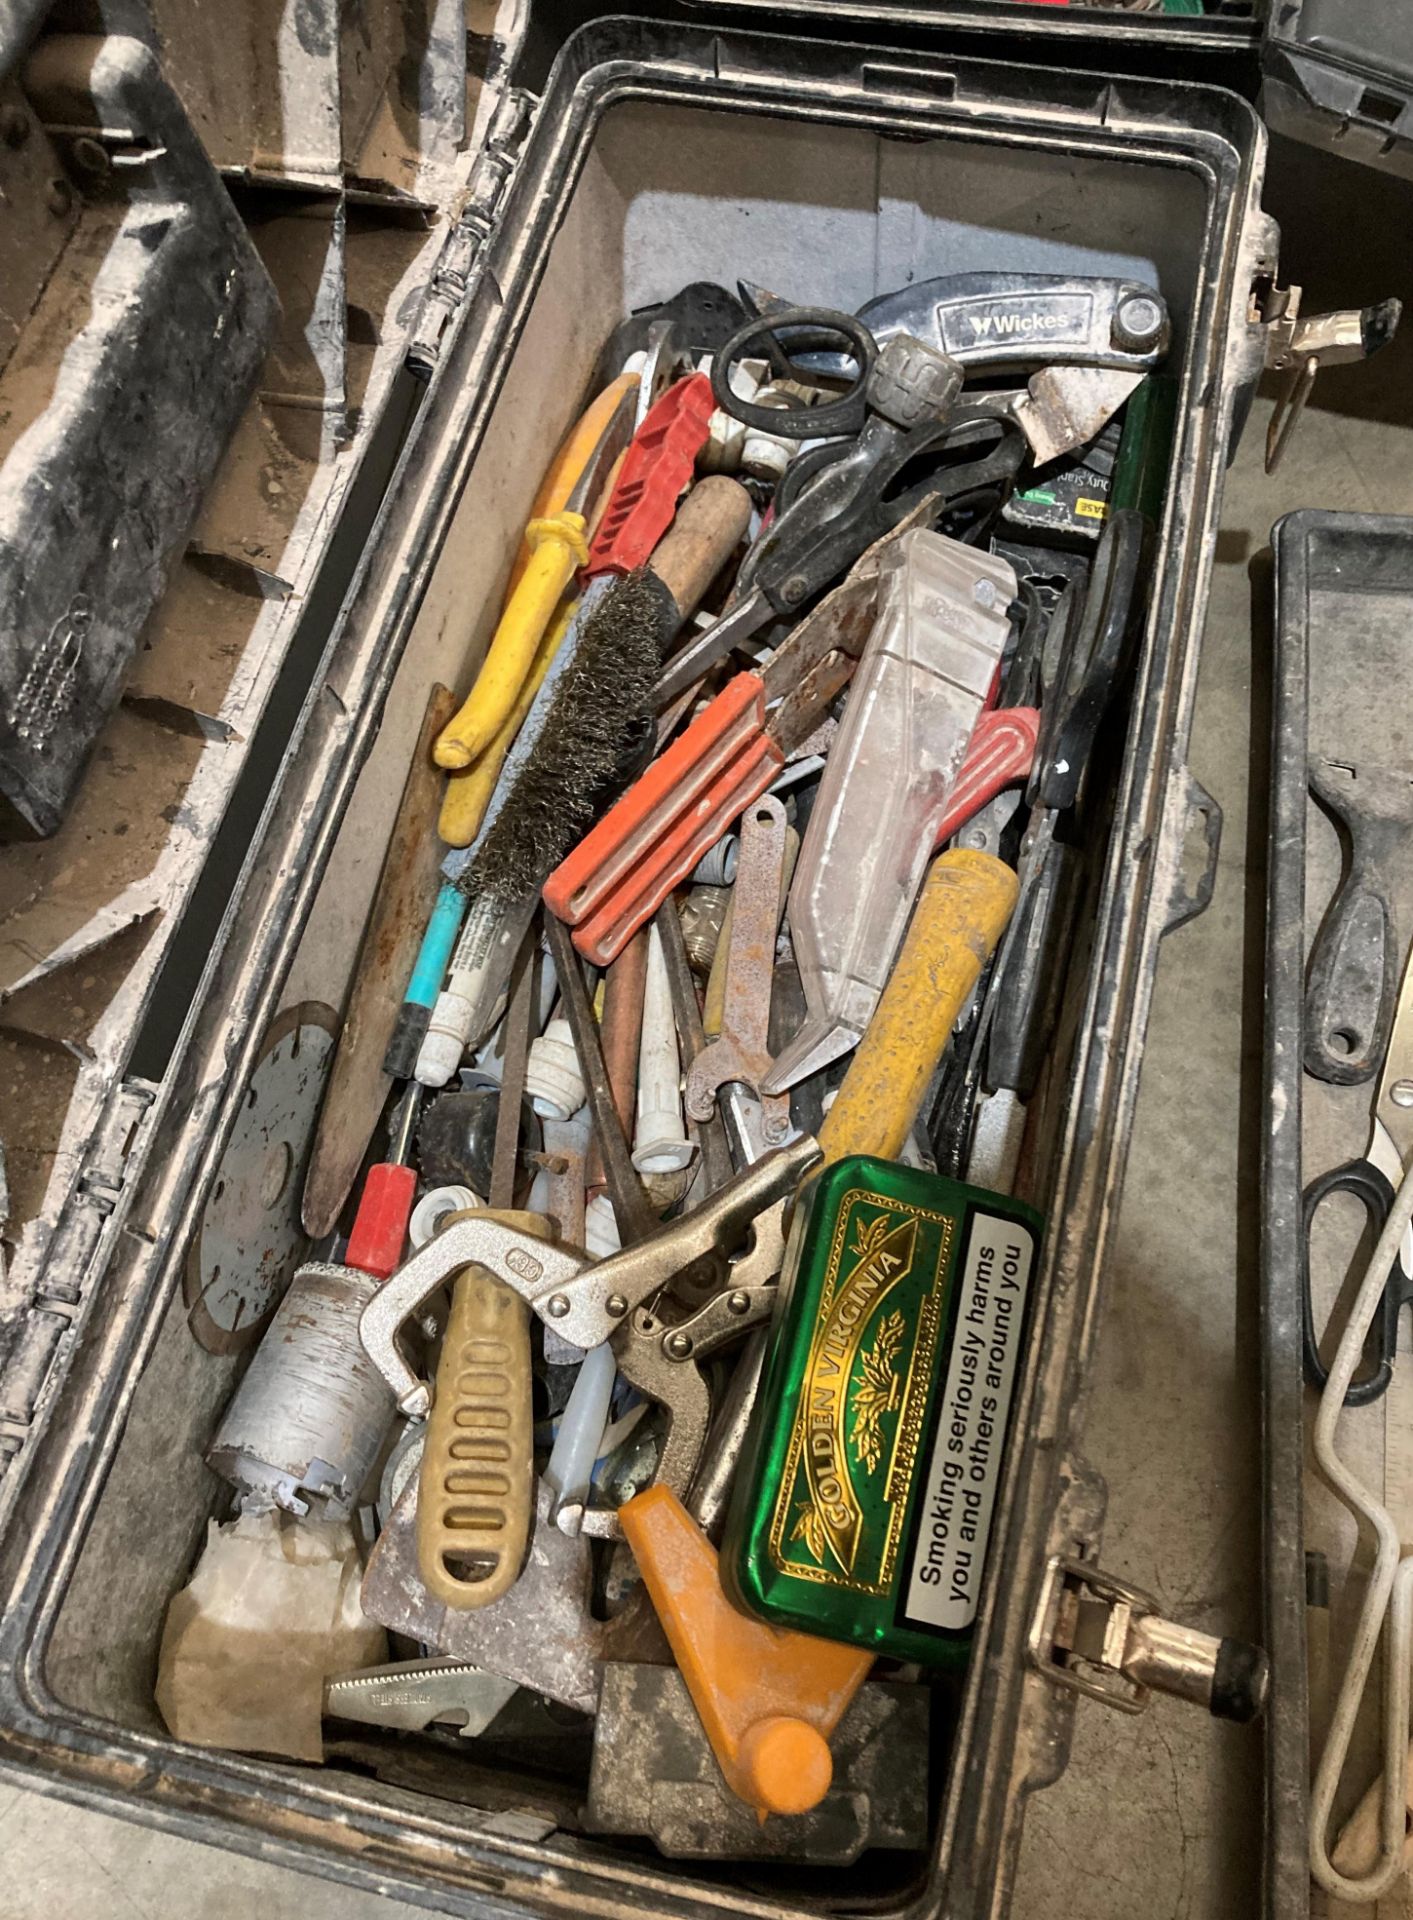 3 x assorted tool boxes and contents - assorted hand tools, spanners, screwdrivers, pliers, - Image 2 of 4